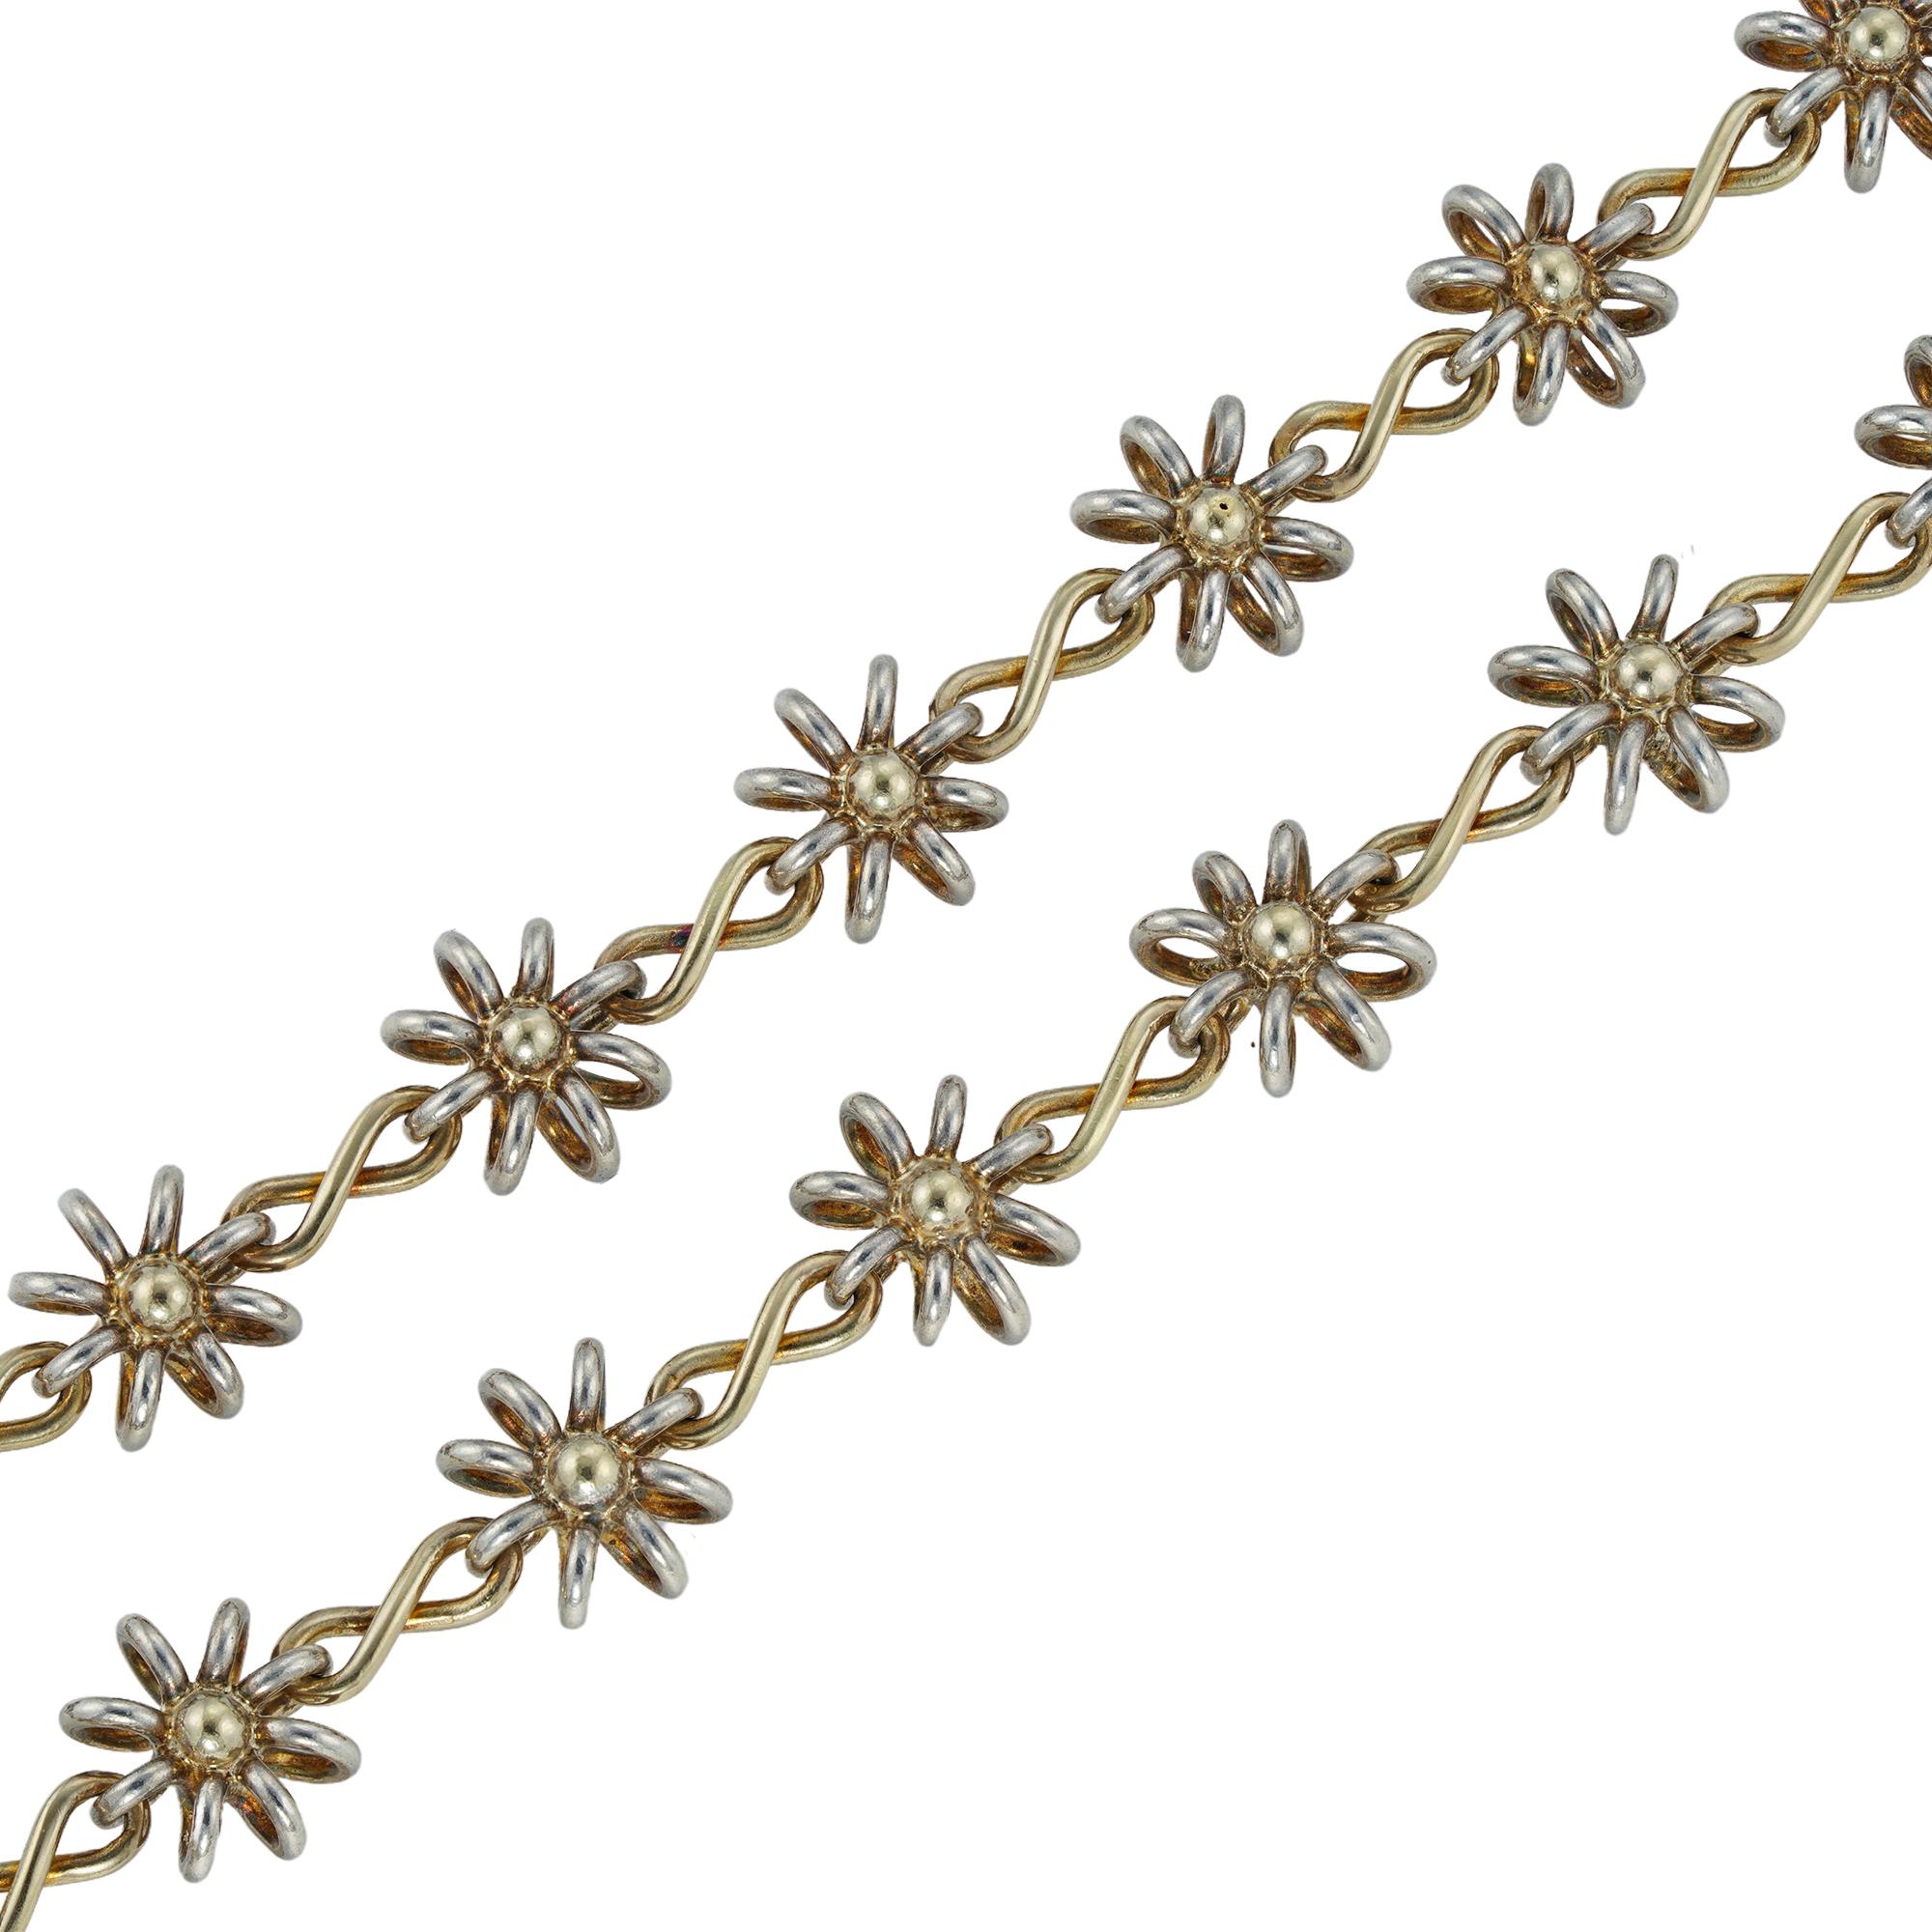 A Darcey Bussell necklace, handmade by Lucie Heskett-Brem, the Gold Weaver of Lucerne, the necklace comprising twenty seven large silver  uniform floral motifs with yellow gold figure-of-eight links, bearing common control marks for 18 carat gold,